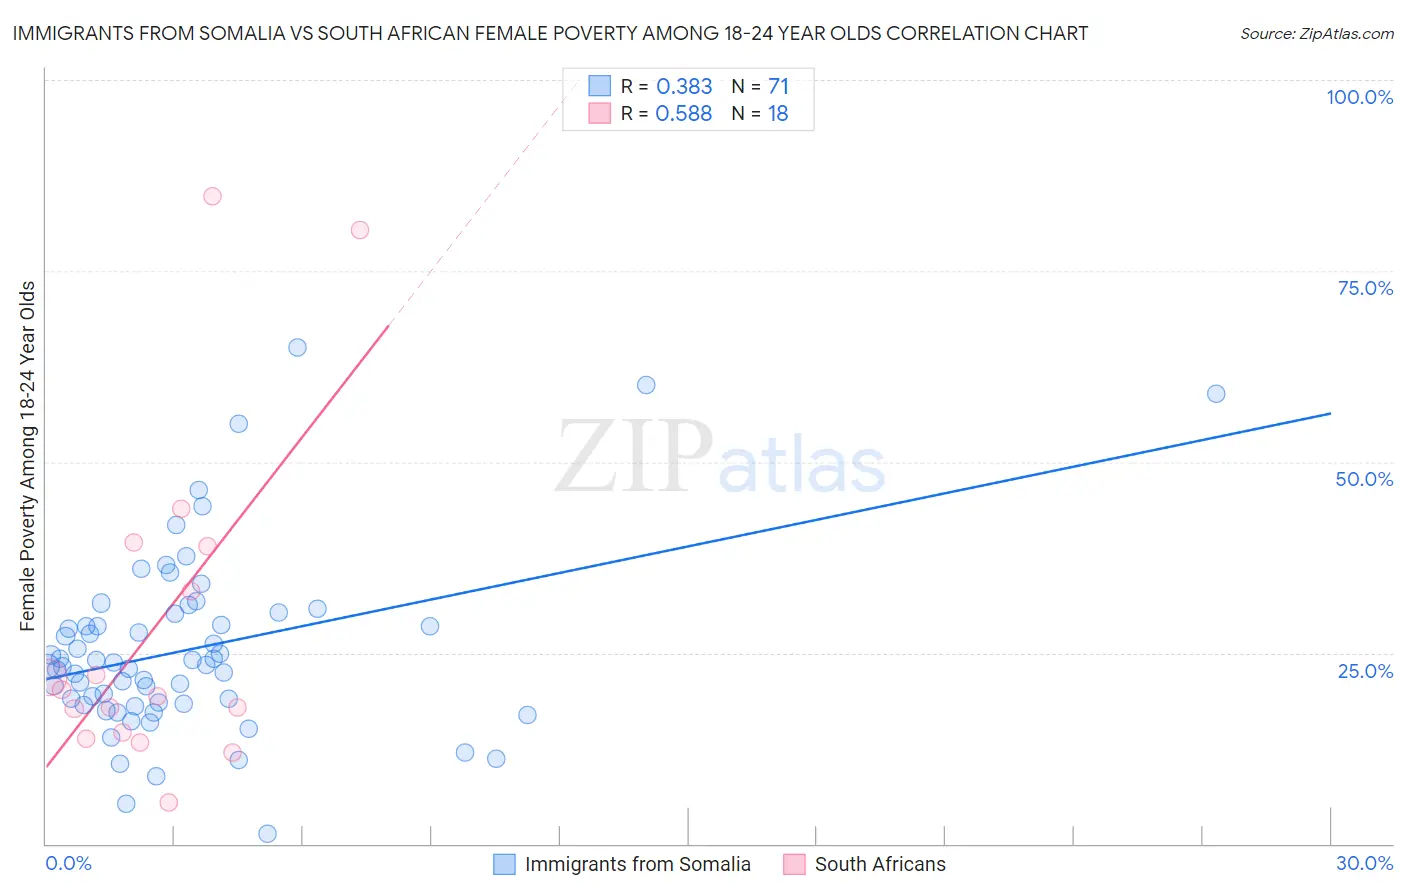 Immigrants from Somalia vs South African Female Poverty Among 18-24 Year Olds